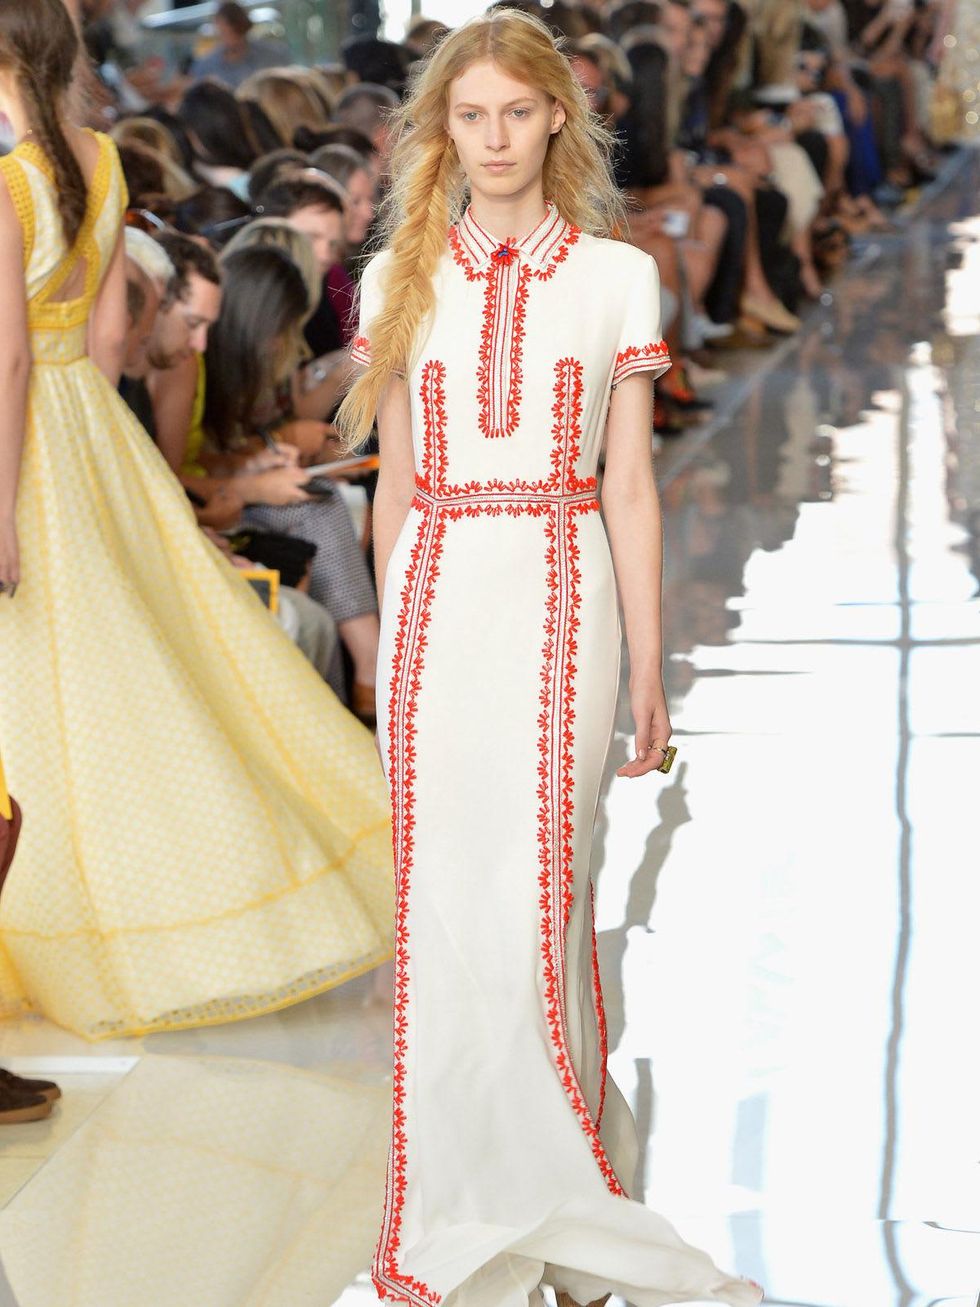 Clifford, Fashion Week spring 2013, Tuesday, Sept. 11, 2012, Tory Burch, long embroidered dress